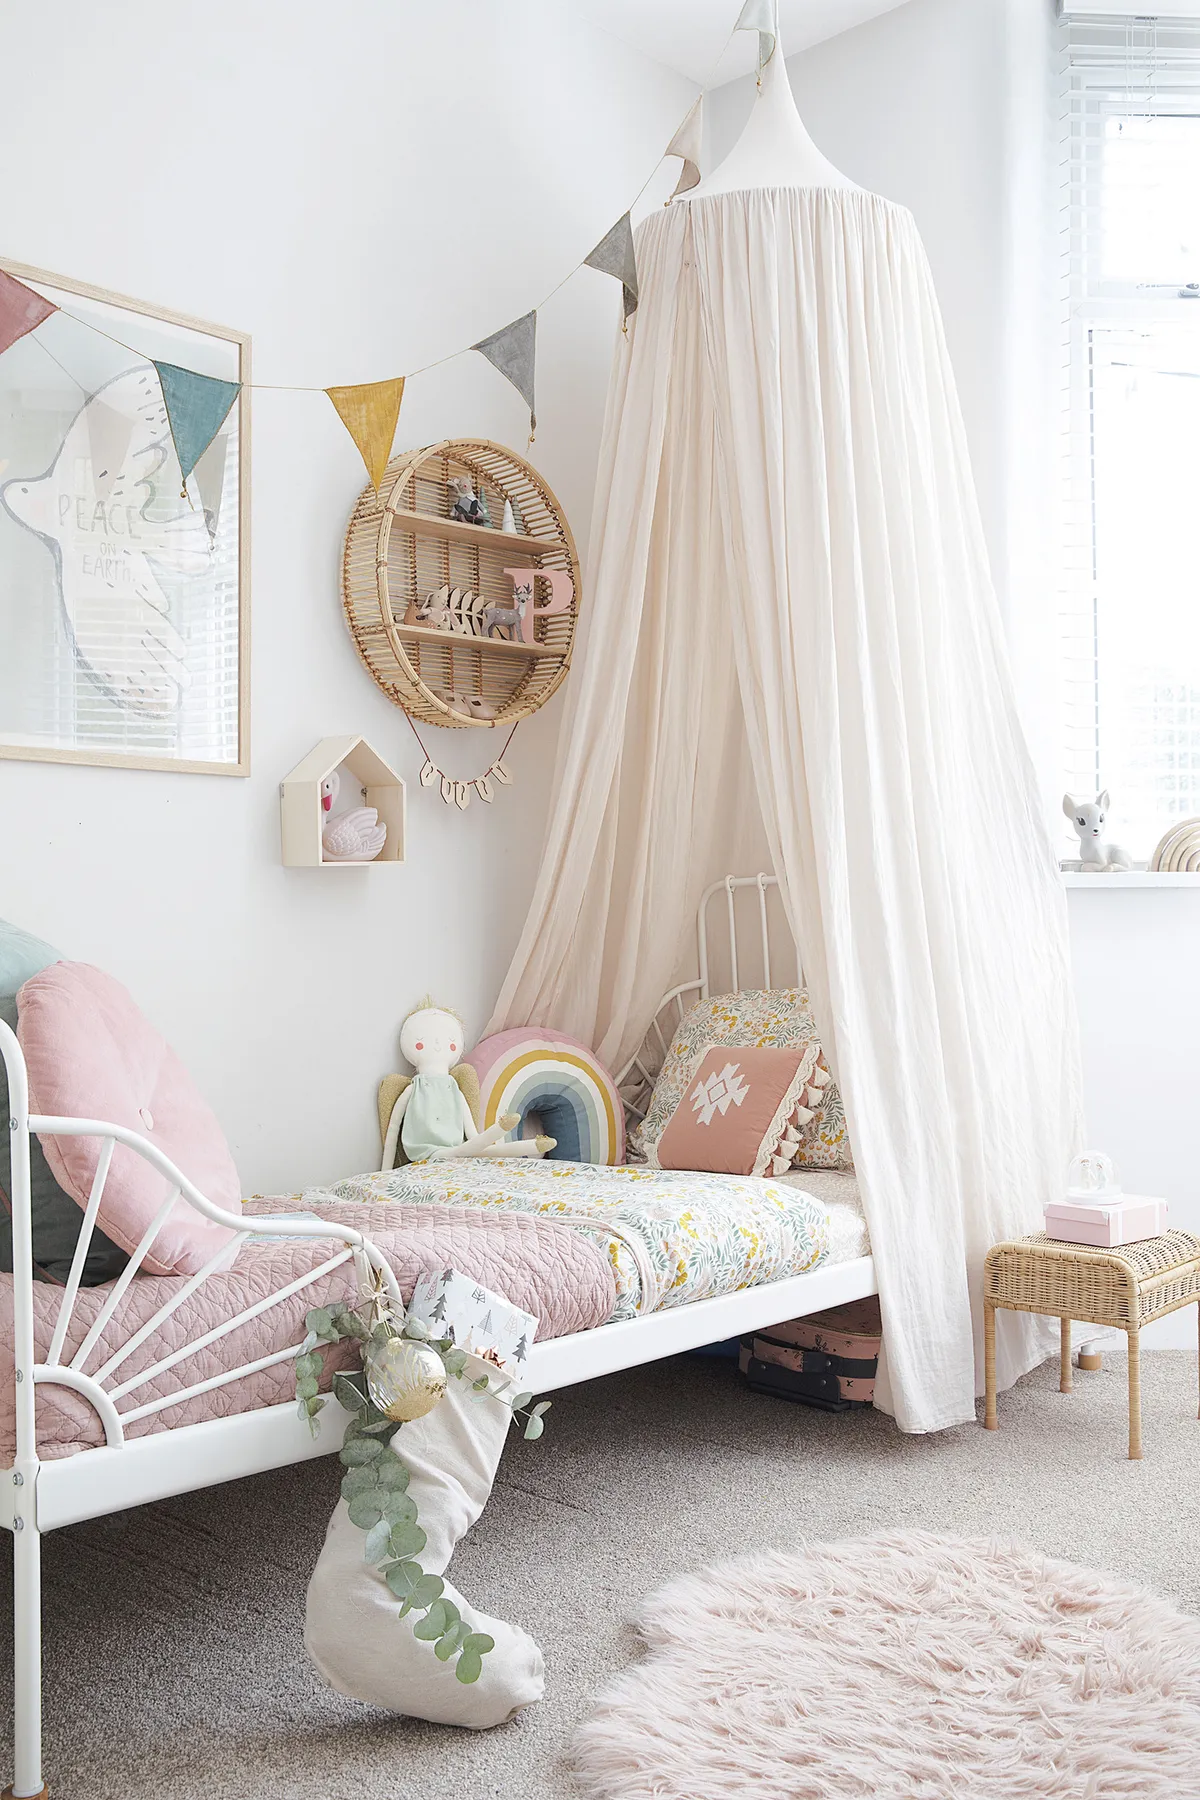 A pretty canopy from Molly Meg creates a fairytale-feel in Poppy’s bedroom, which also features rattan shelves from Matalan. ‘The cute little stool is ideal for hiding stuff from her brother,’ Louise says